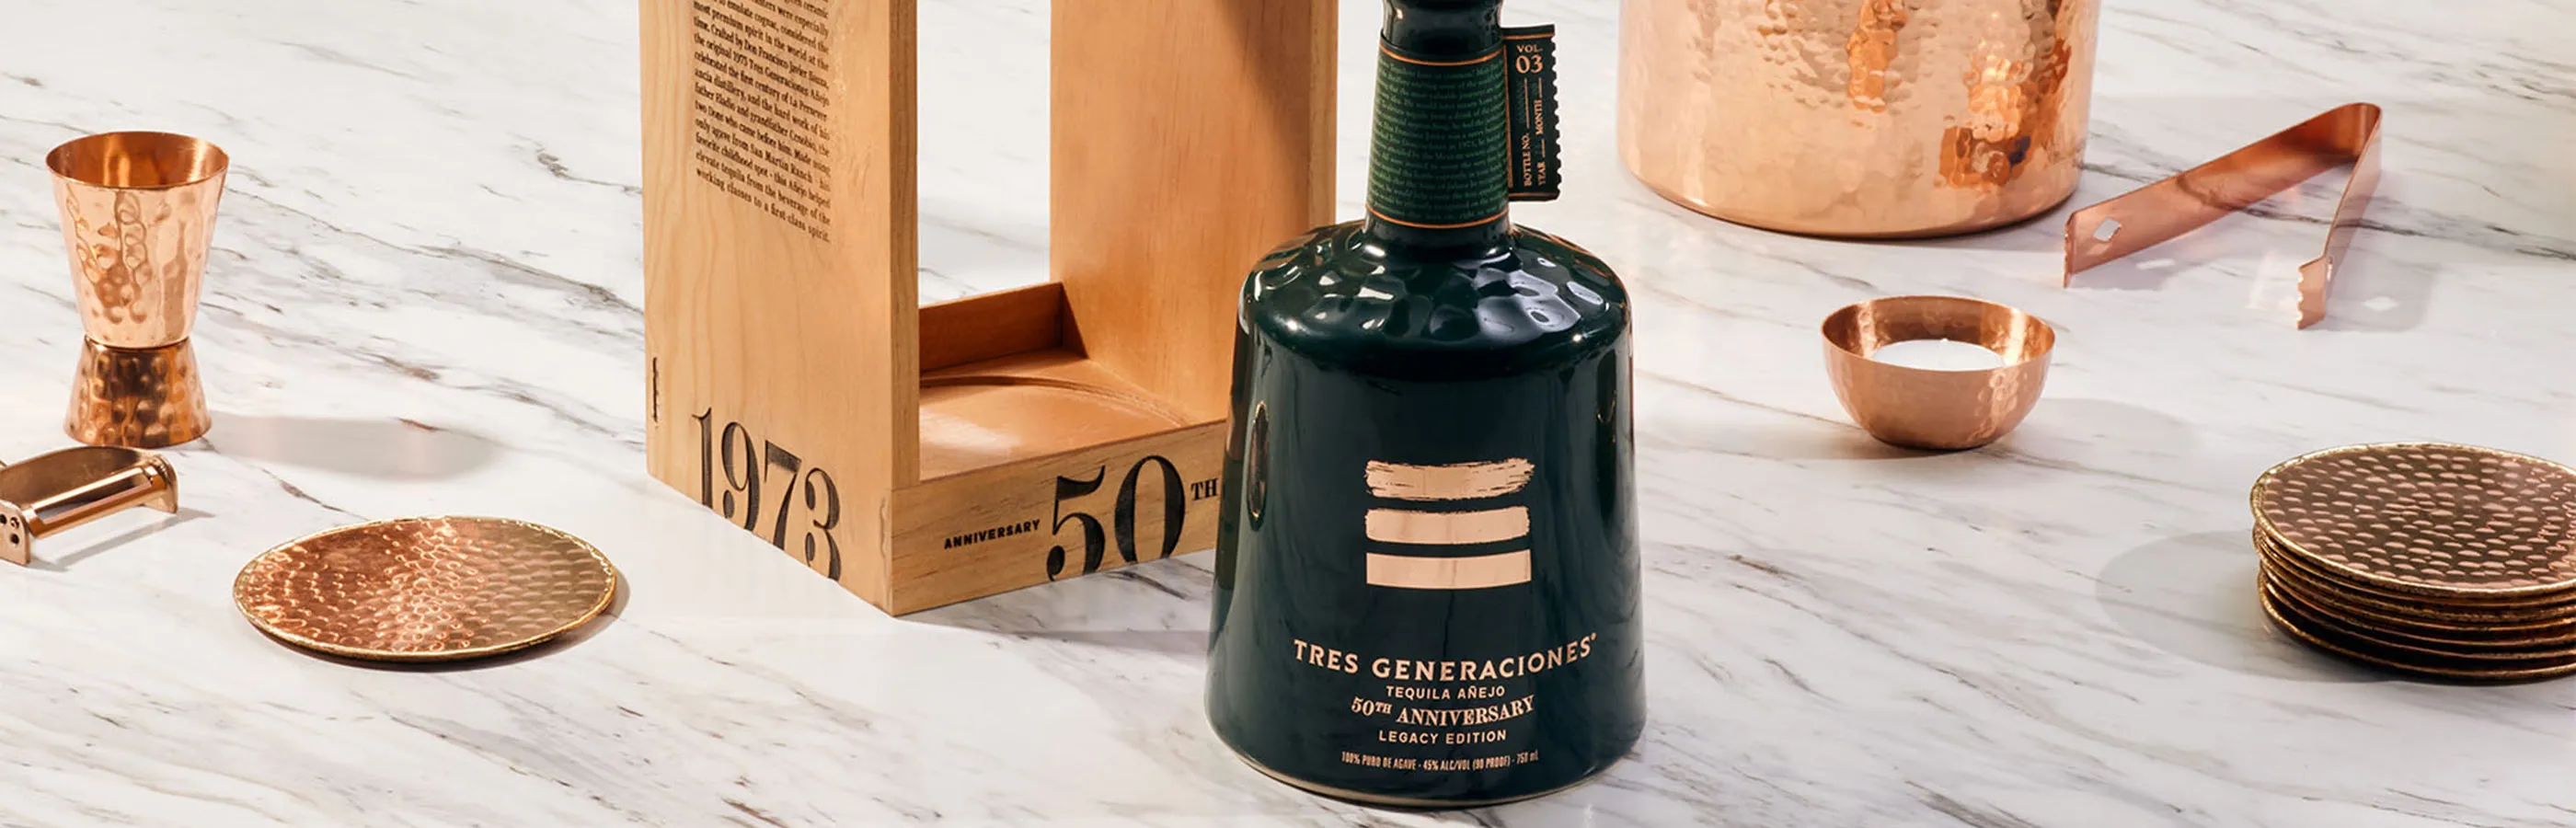 Tres Generaciones® Introduces 50th Anniversary Limited Edition, Prestige Tequila Inspired By The Original 1973 Añejo Recipe